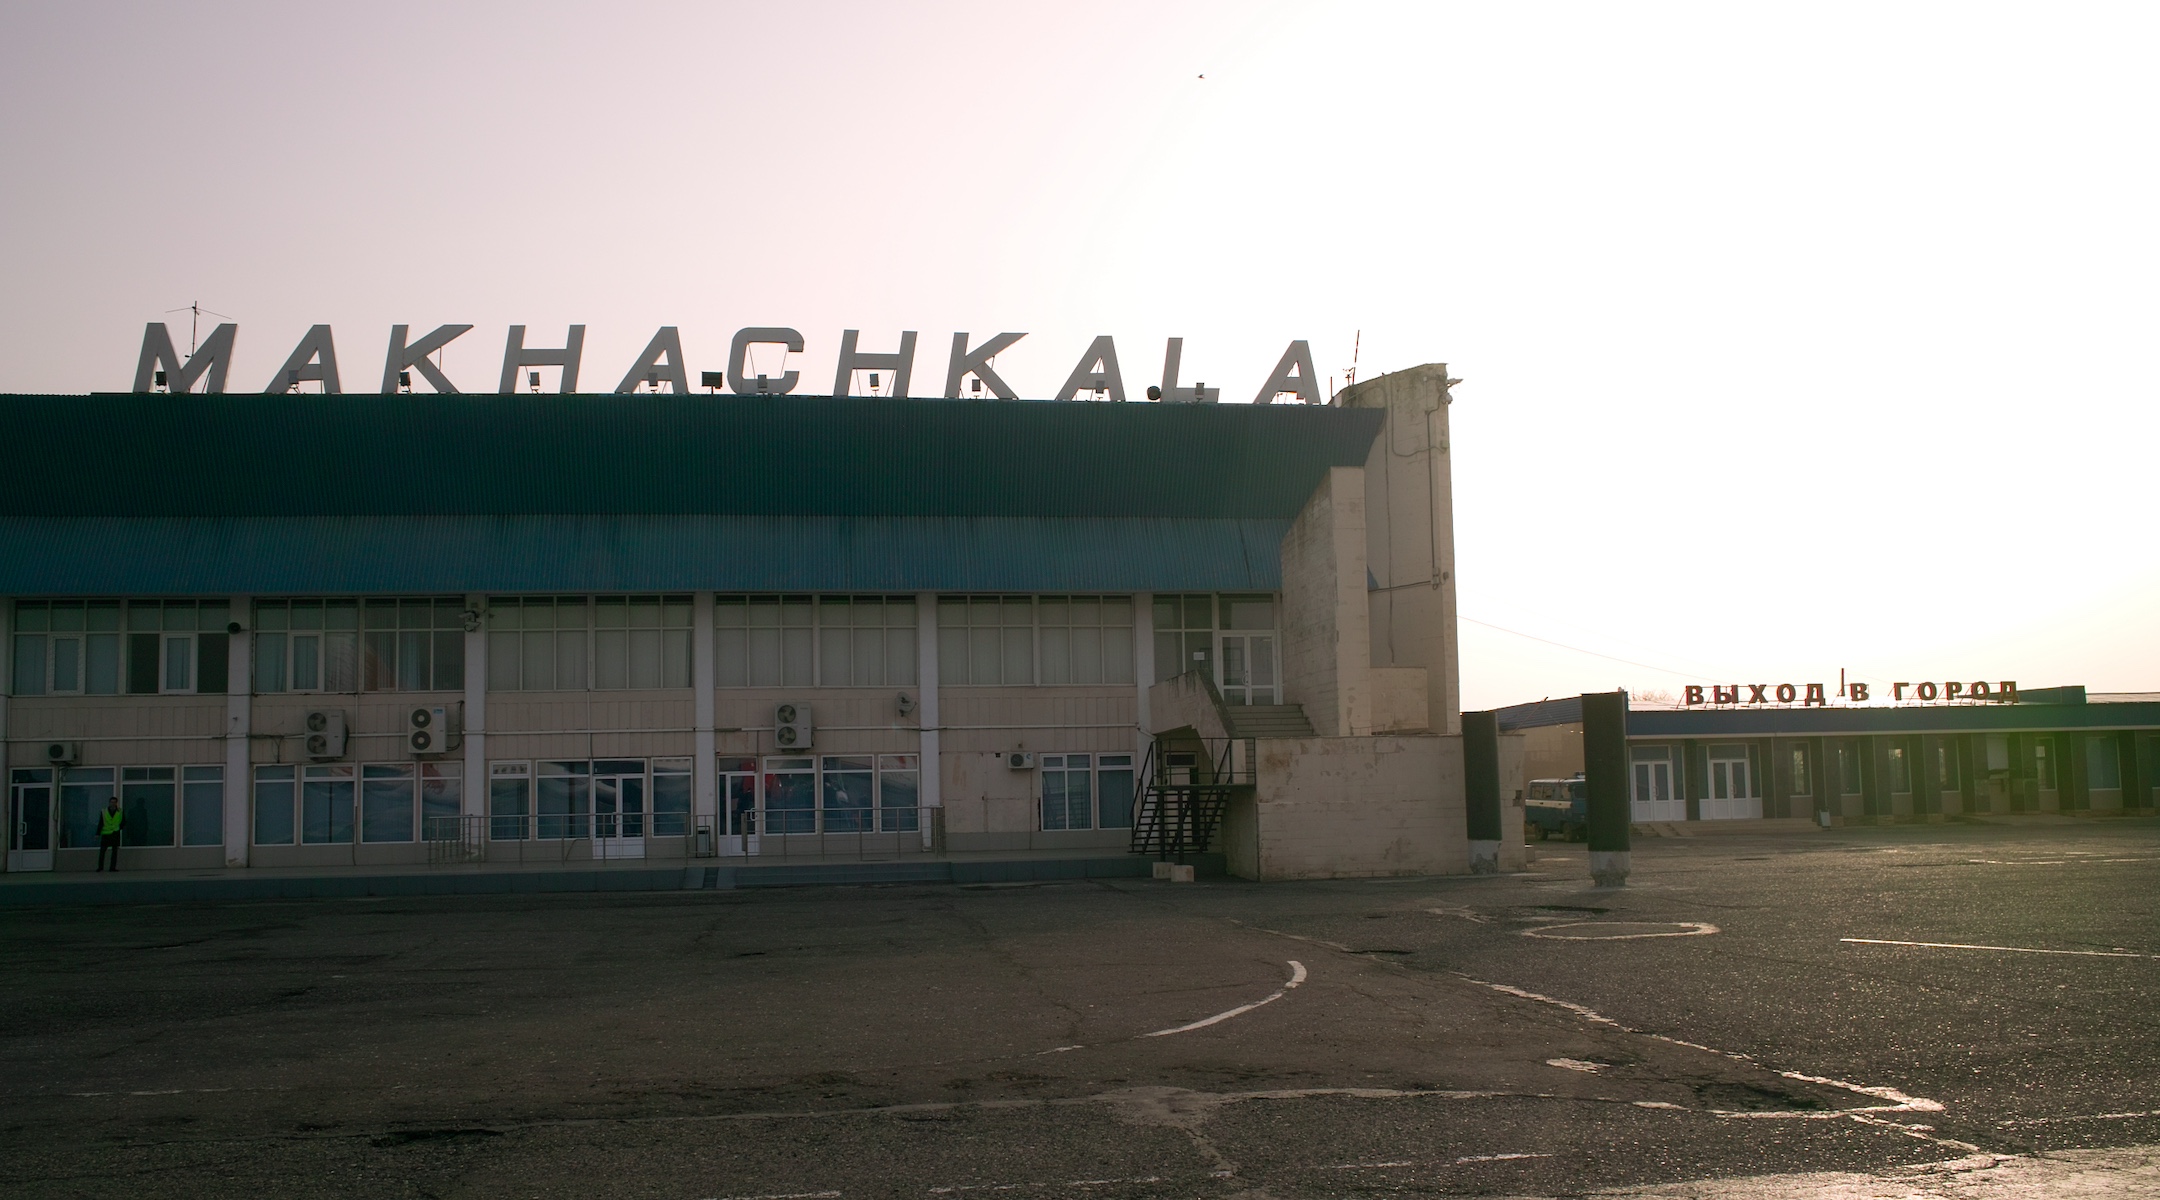 A view outside the Makhachkala airport in 2010. (Fred Schaerli/Wikimedia Commons)